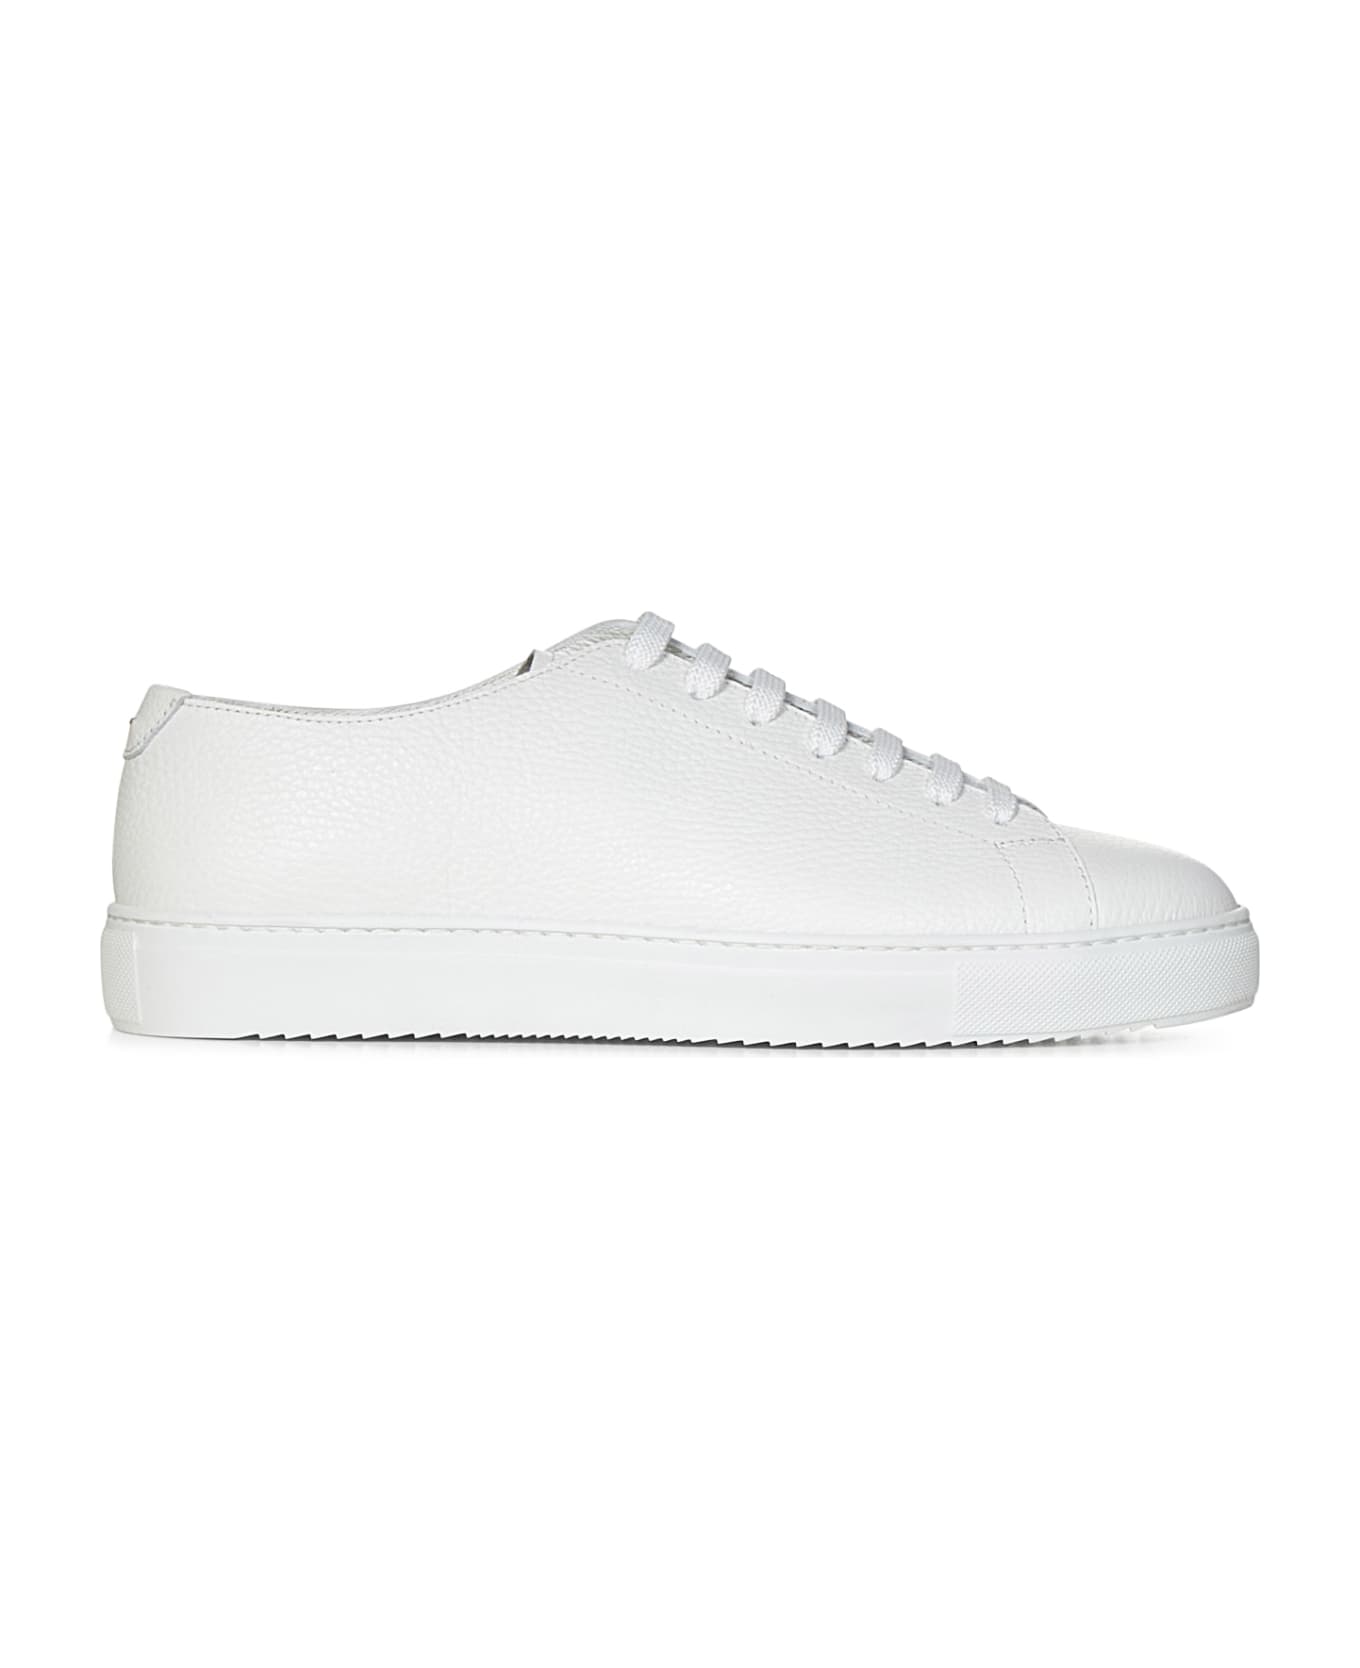 Doucal's Sneakers - White